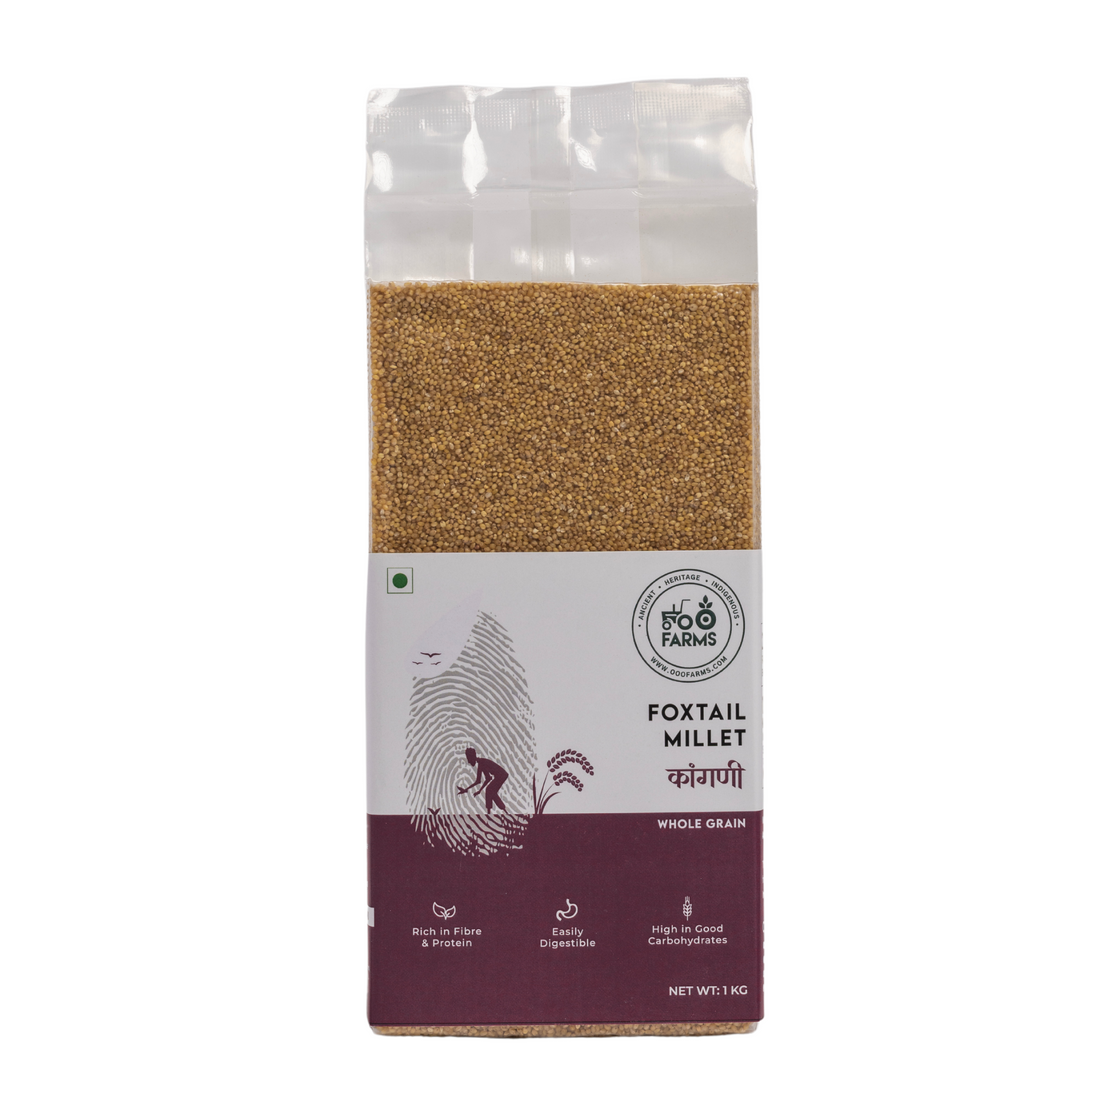 OOO Farms Whole Foxtail Millet Package Frontside